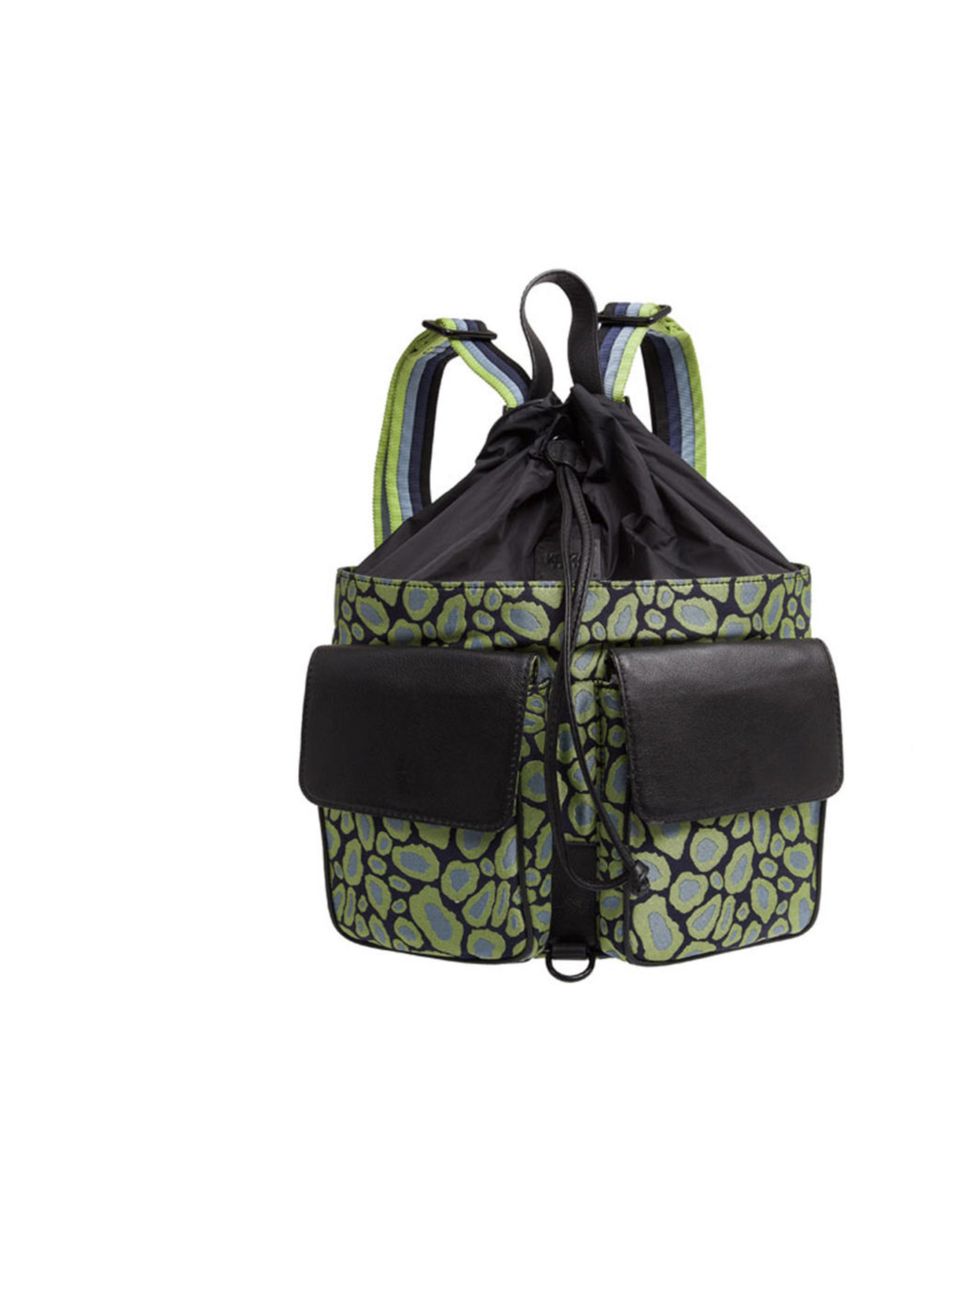 <p><a href="http://www.elleuk.com/catwalk/designer-a-z/kenzo/autumn-winter-2013">Kenzo</a> black and green cloudy leopard print backpack £310 at <a href="http://www.liberty.co.uk/fcp/product/Liberty//Black-and-Green-Leopard-Print-Backpack/87176">Liberty.c